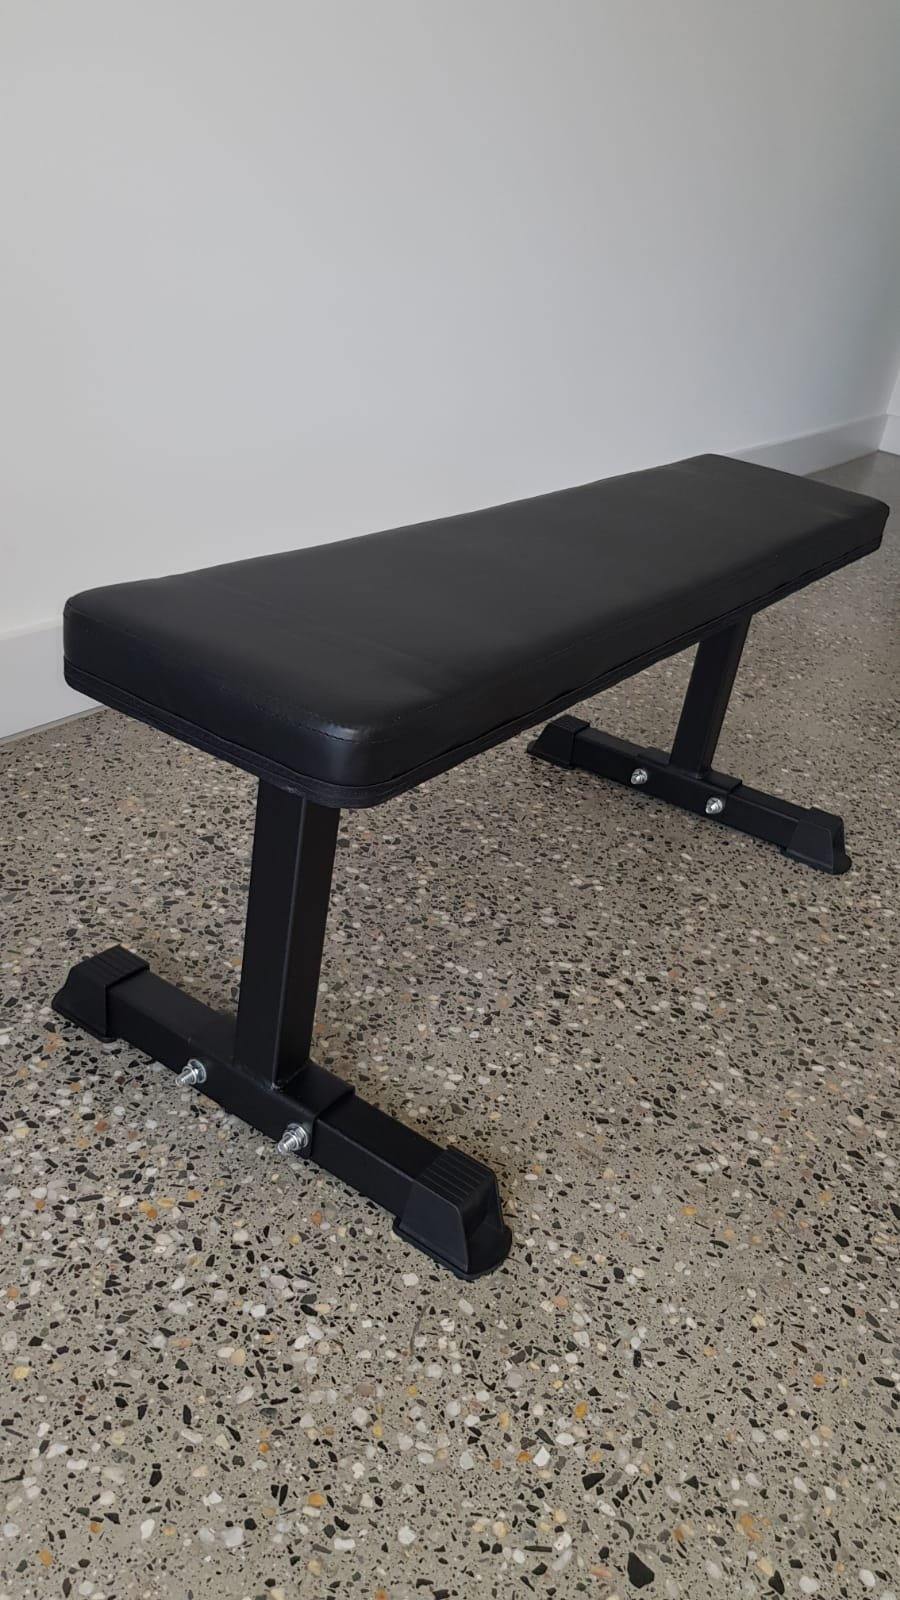 CATCH Flat Bench | In Stock - Flat Benches -Catch Fitness